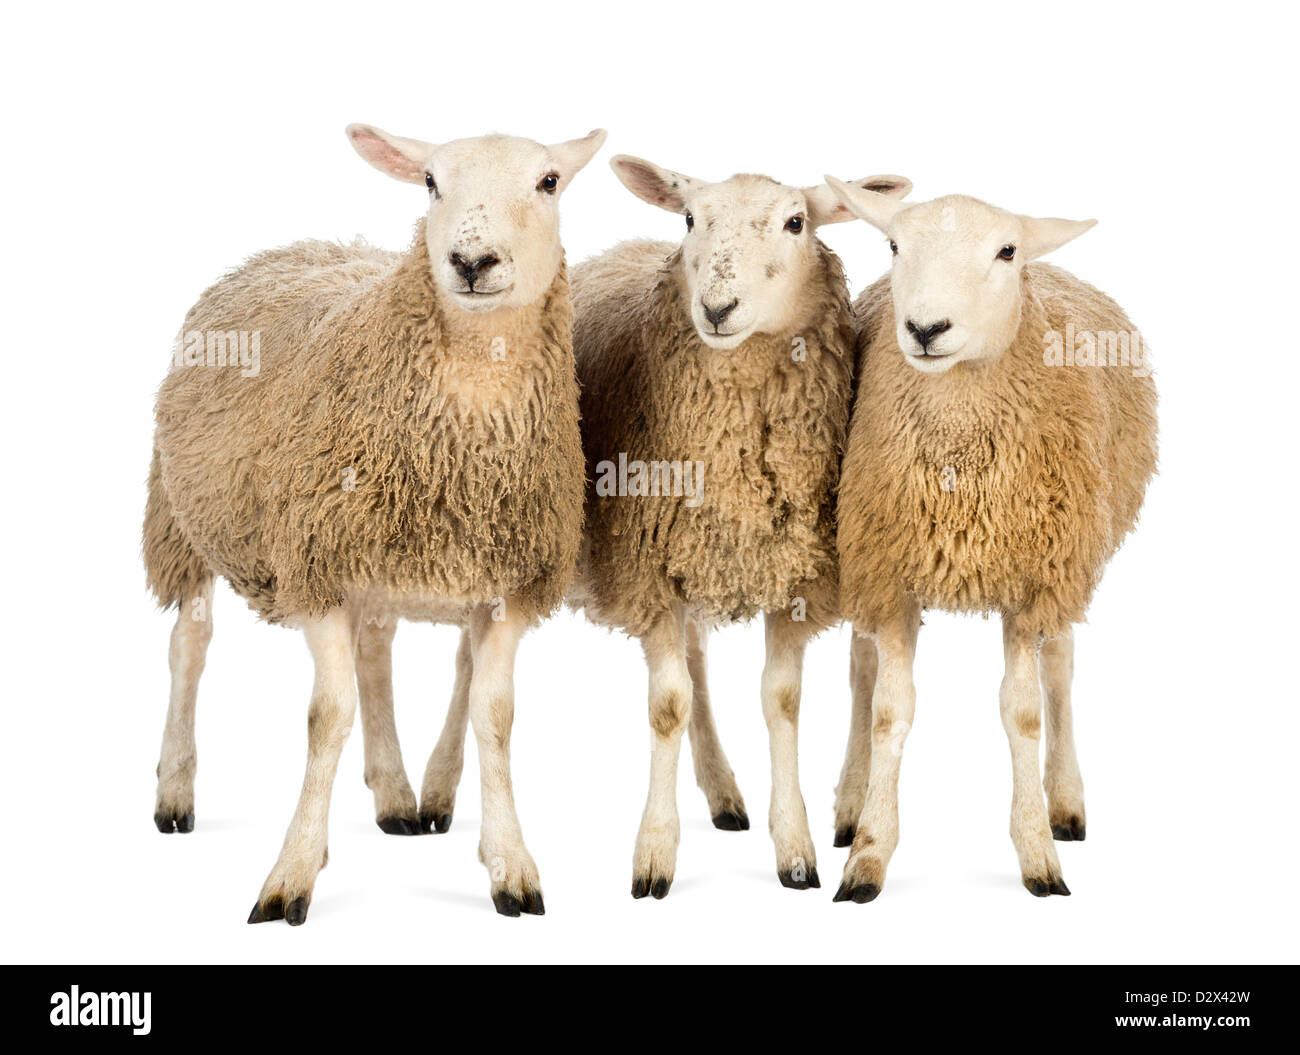 Three Sheep standing in front of white background Stock Photo